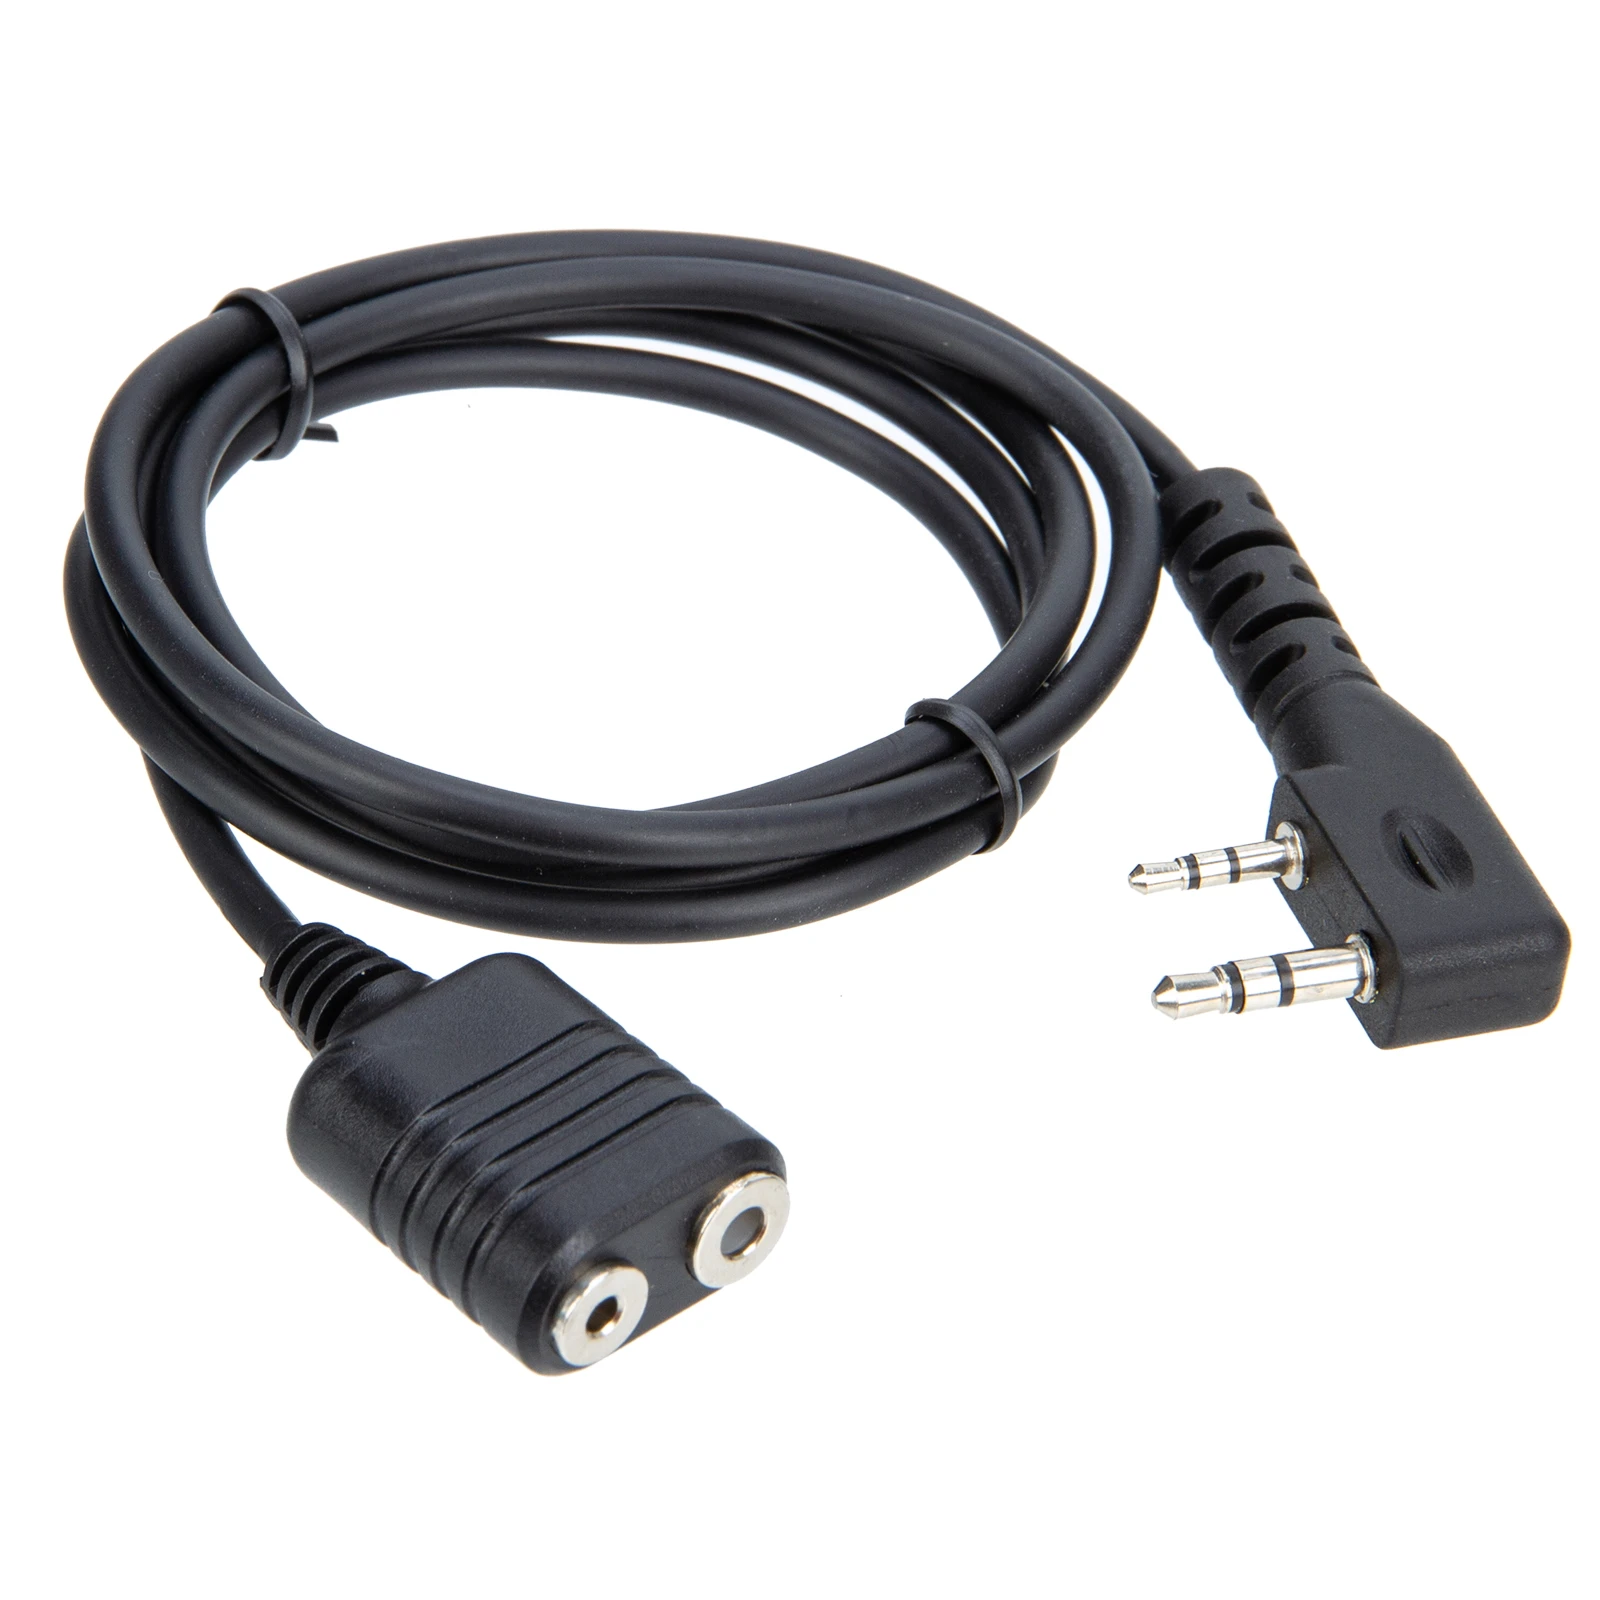 For Kenwood Walkie Talkie K Type 2 Pin Speaker Mic Headset Earpiece Extension Cord Cable For BaoFeng UV-5R BF-888s